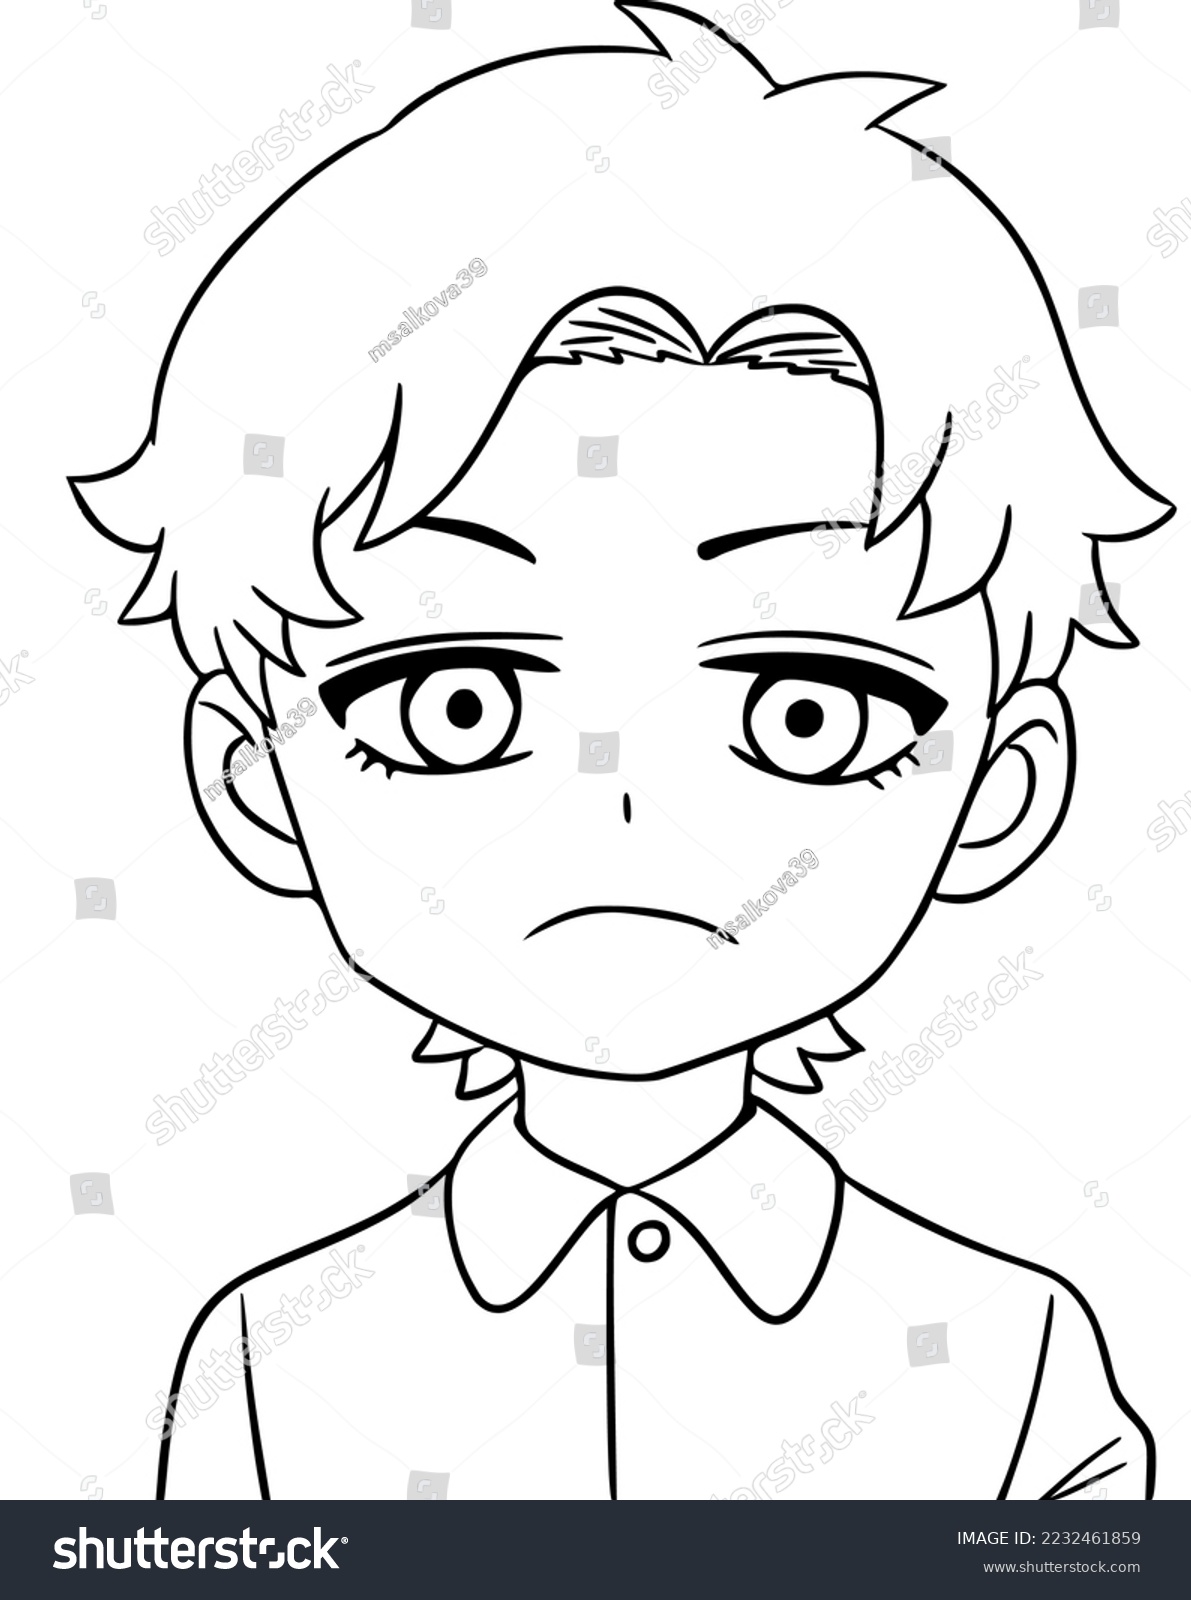 SVG of Boy looks straight ahead, frustrated, school uniform, doodle, coloring book svg